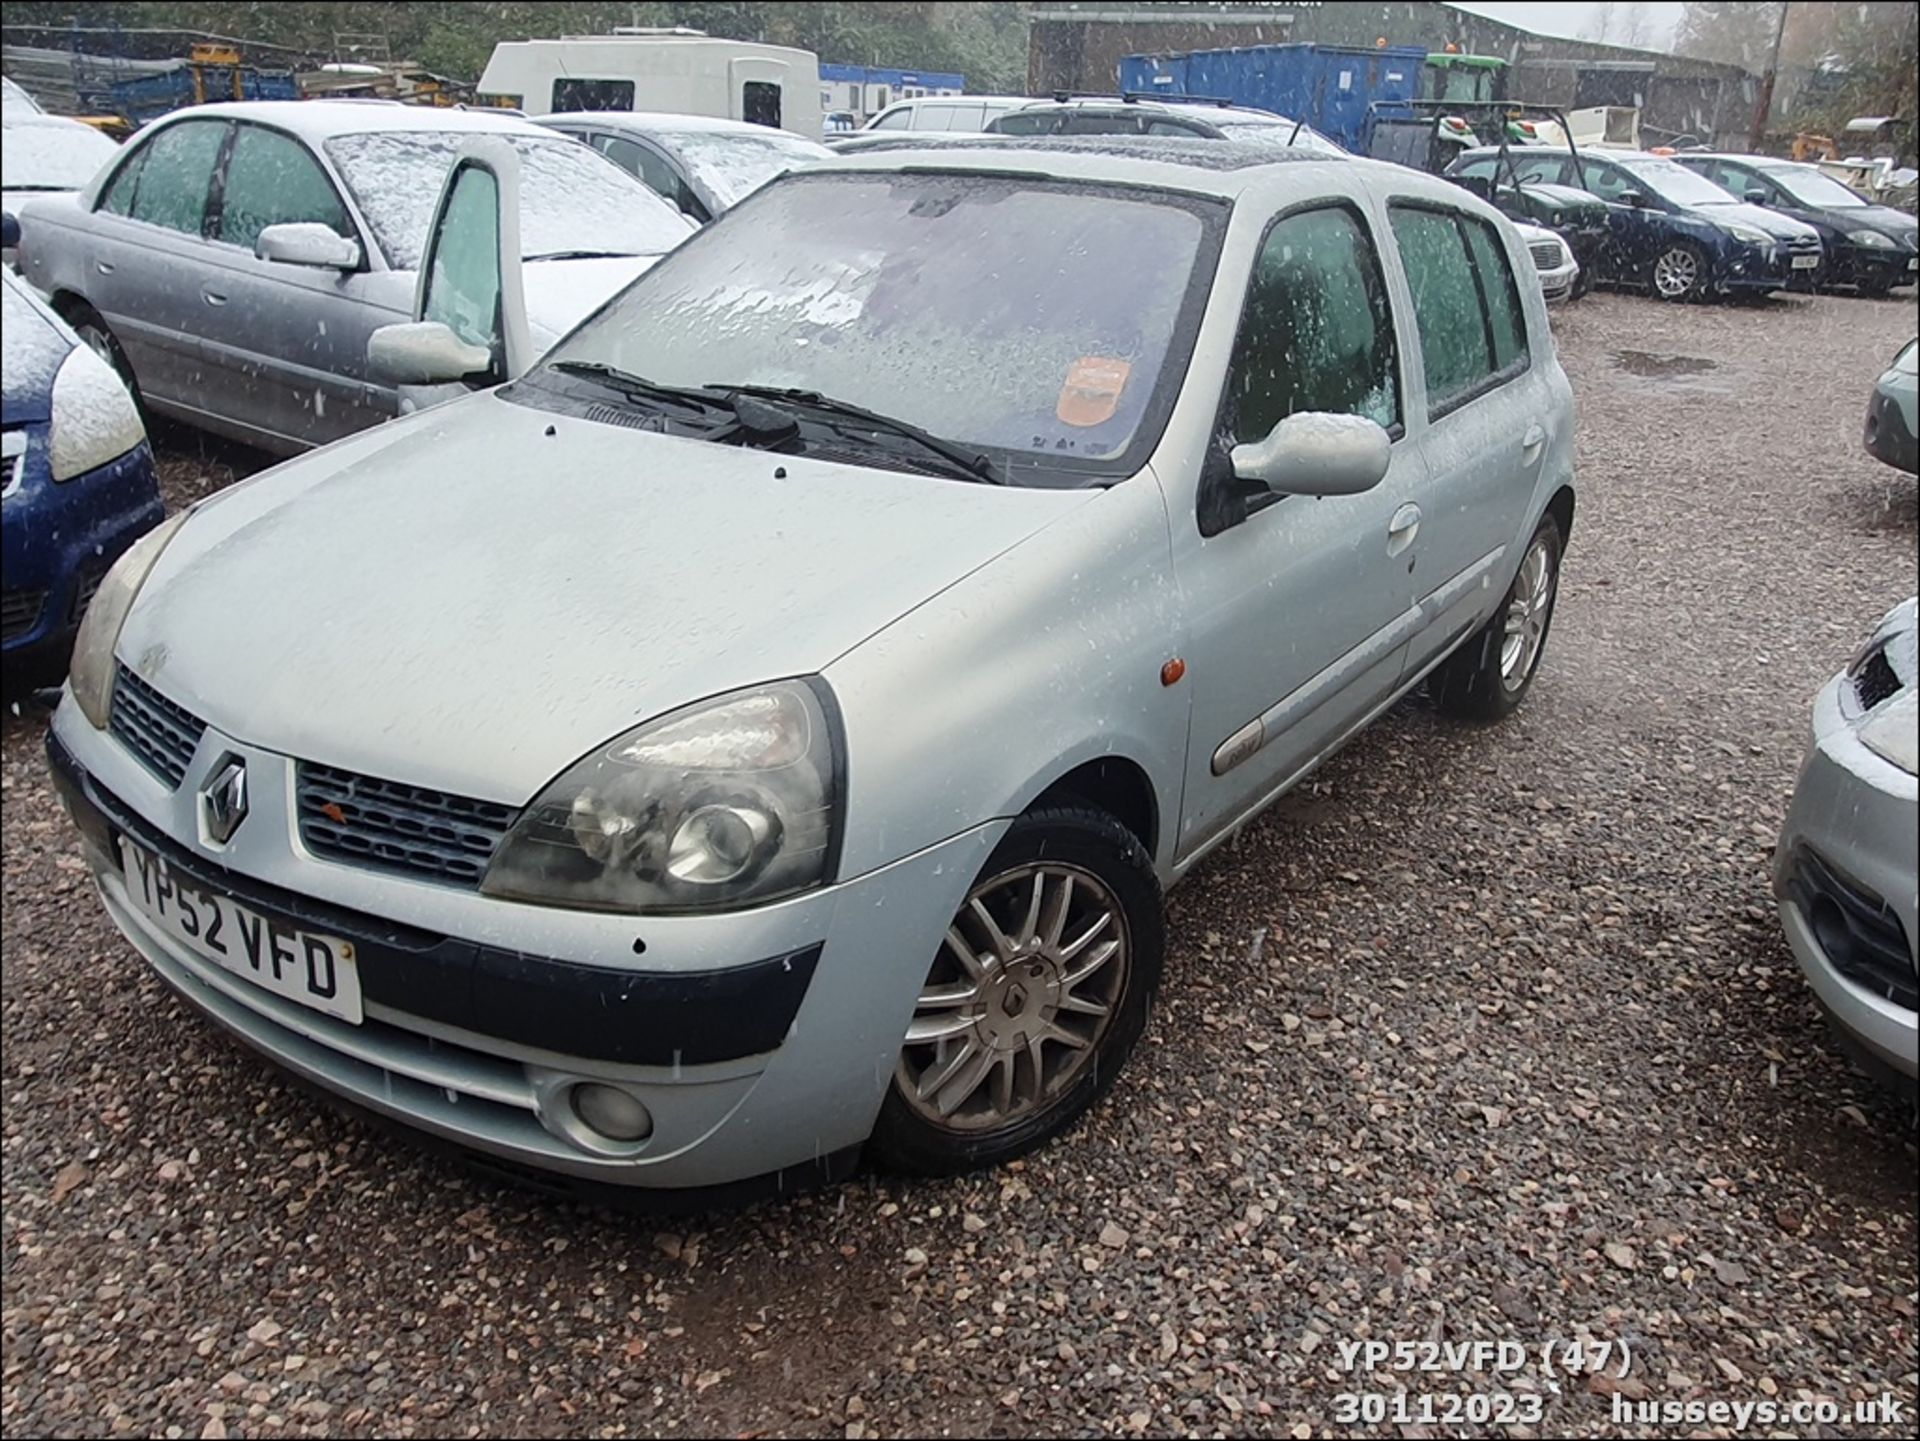 02/52 RENAULT CLIO INITIALE DCI - 1461cc 5dr Hatchback (Silver, 154k) - Image 48 of 48